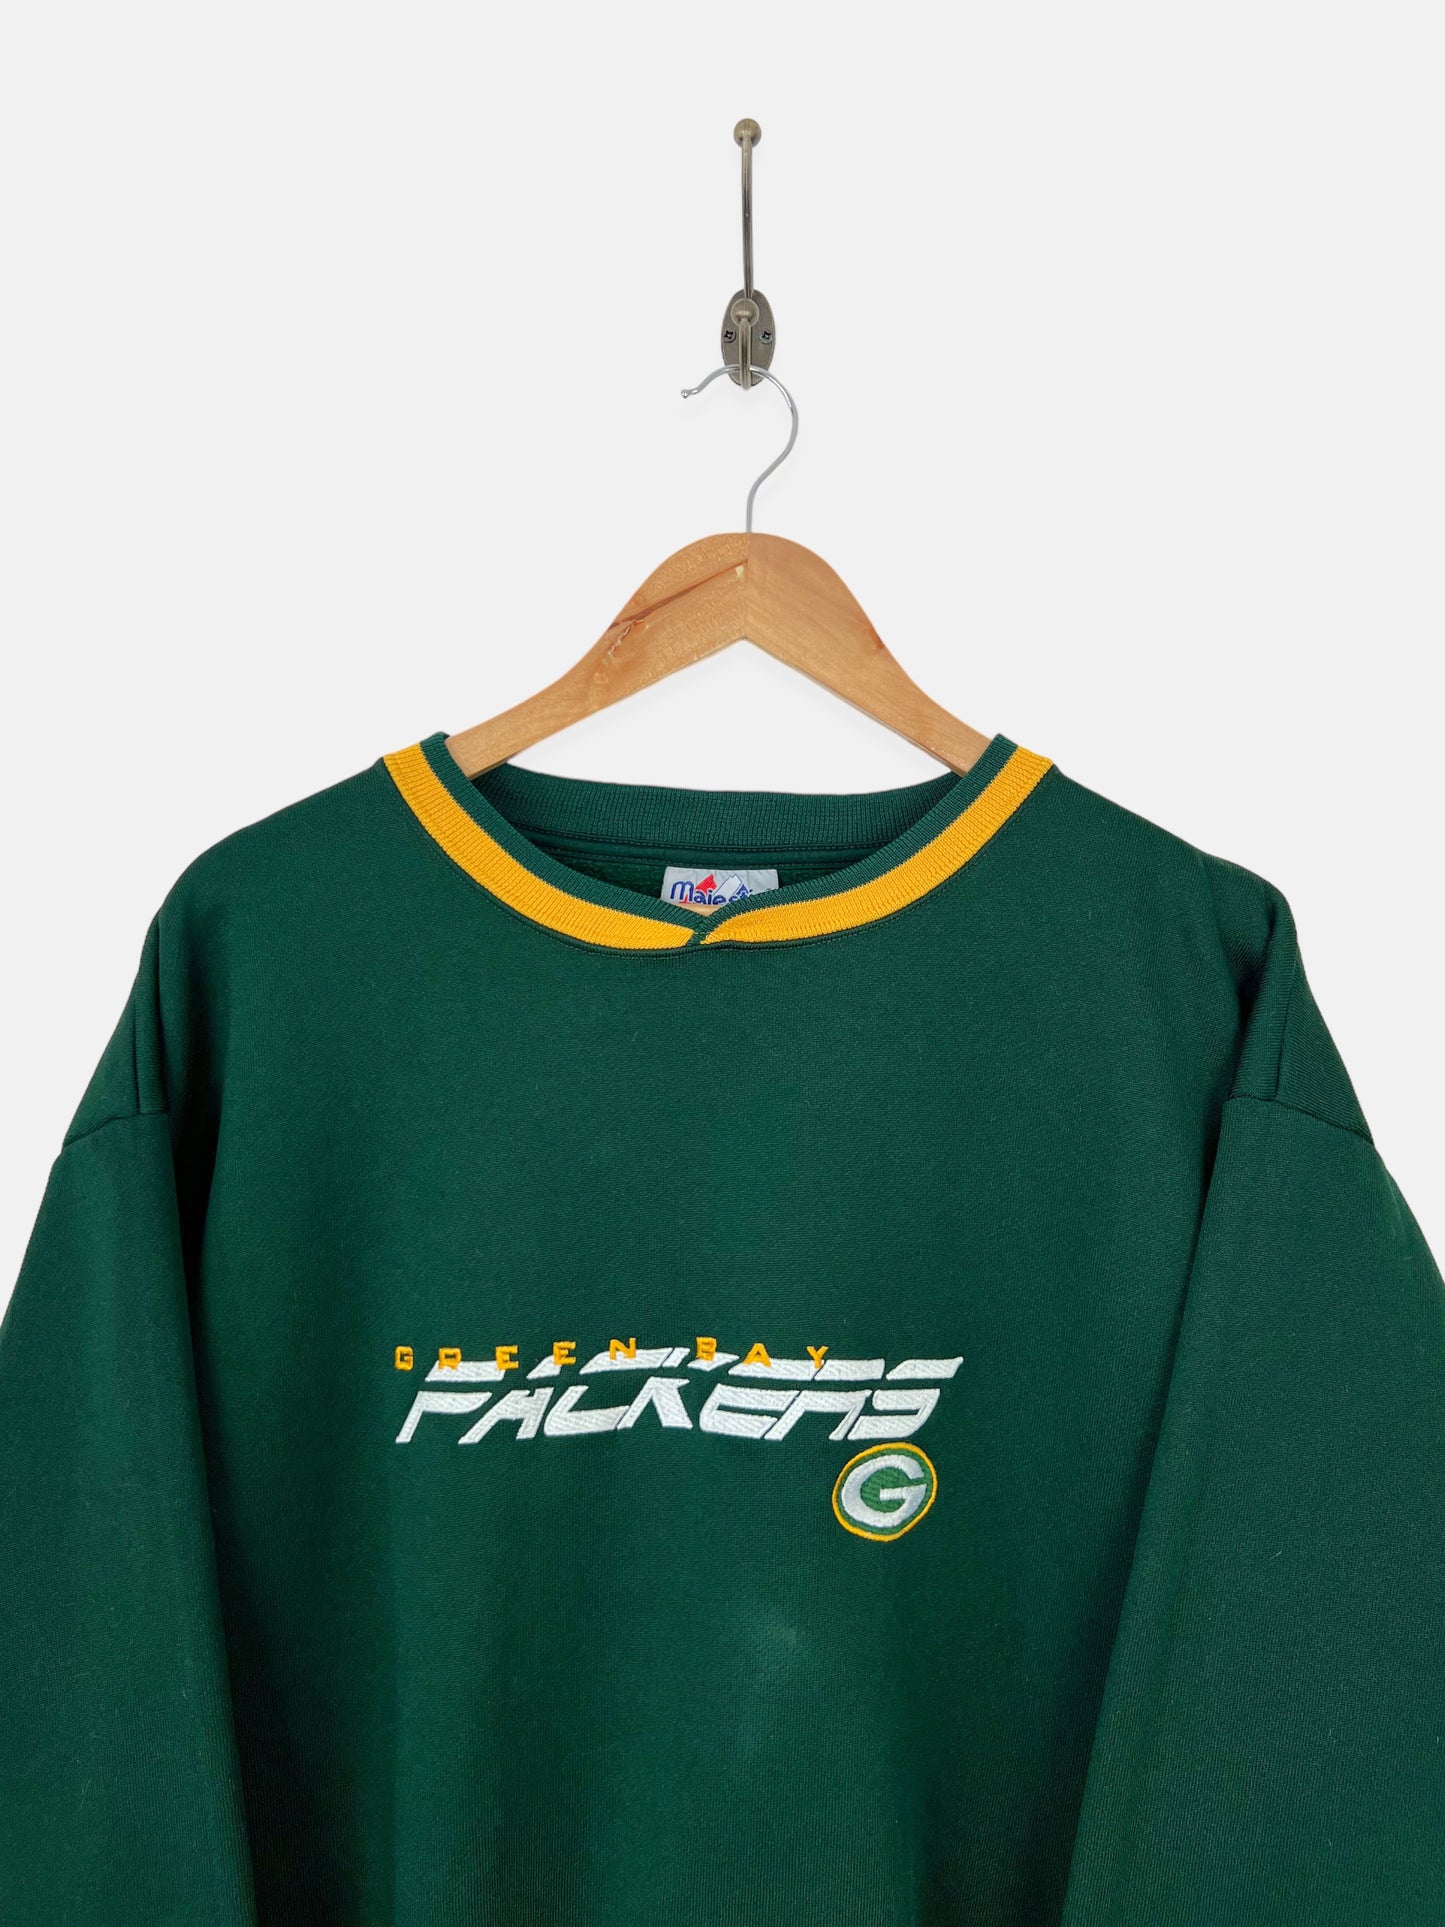 90's Green Bay Packers NFL Embroidered Vintage Sweatshirt Size M-L